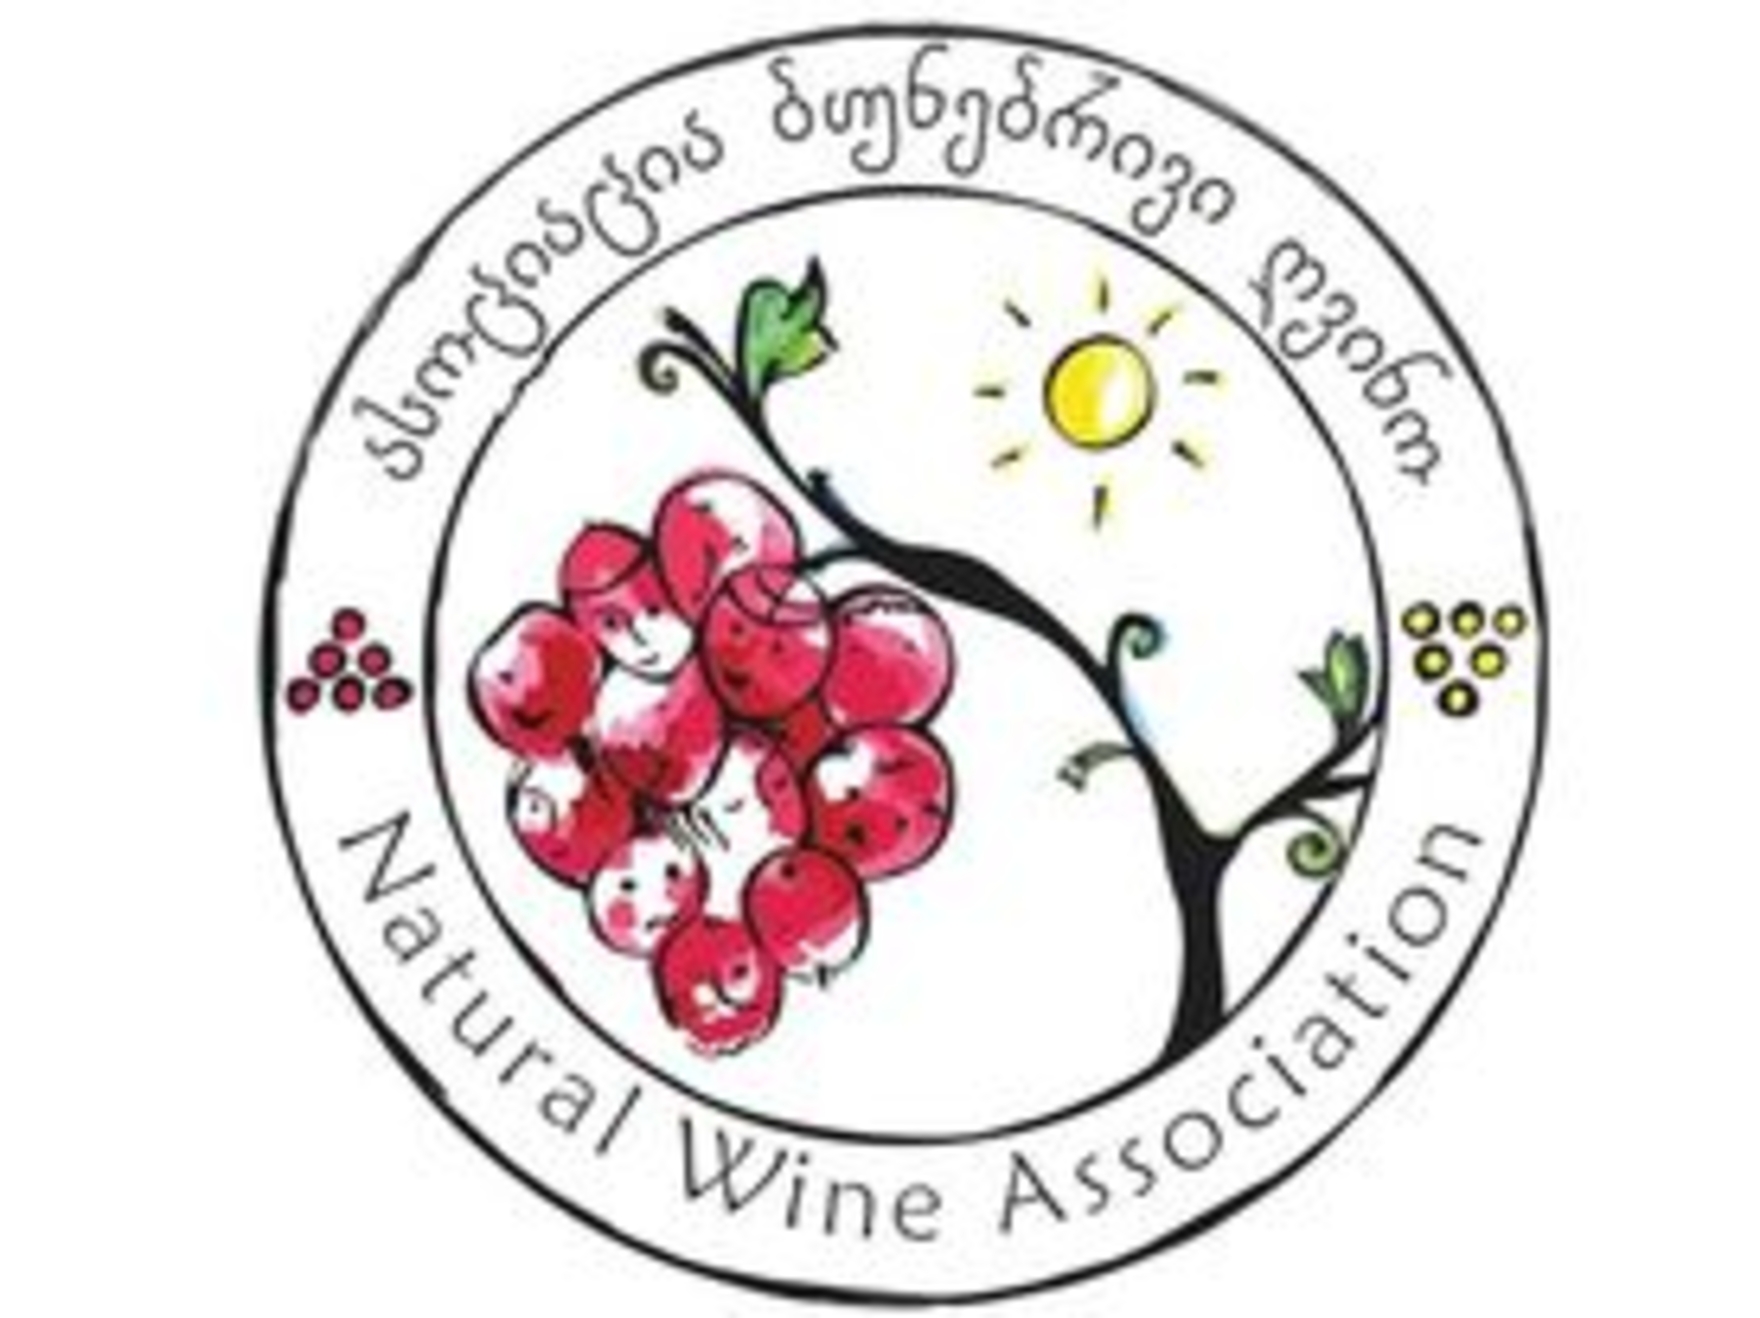 14 new members joined the Natural Wine Association